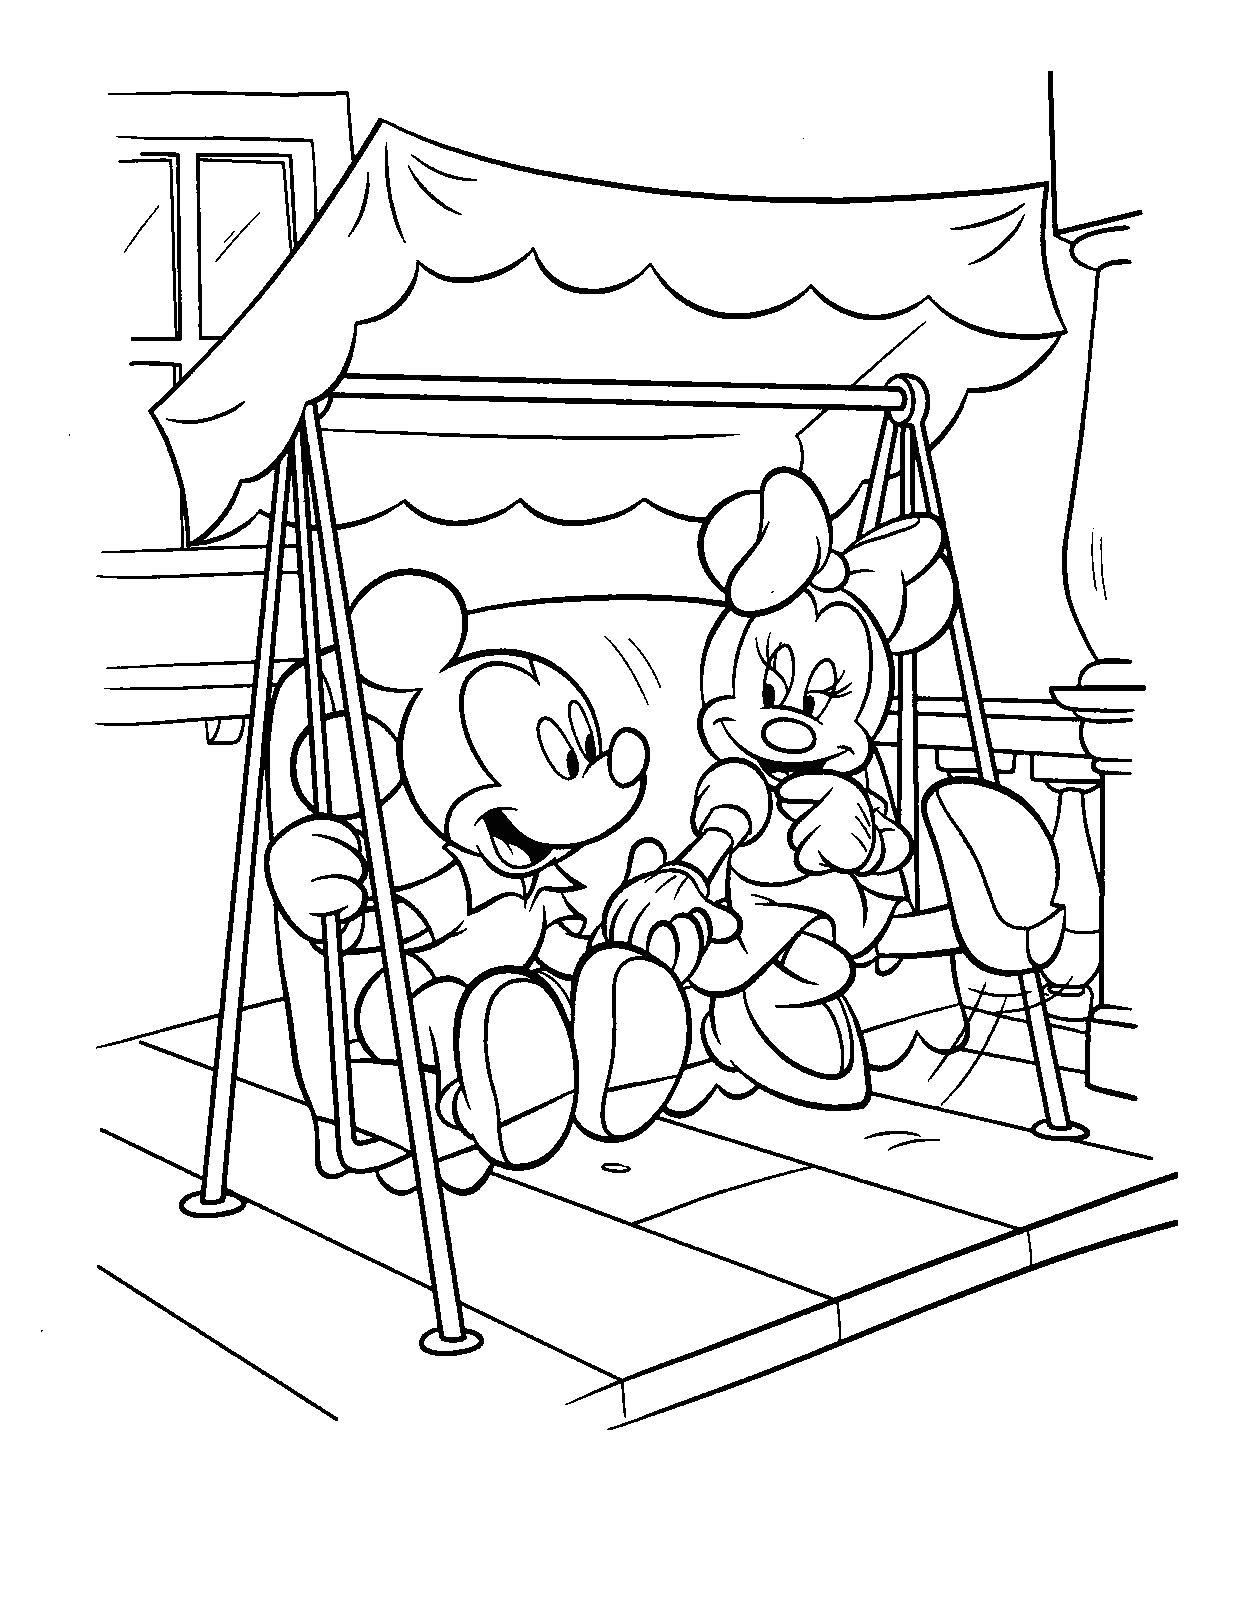 Download Free Printable Minnie Mouse Coloring Pages For Kids